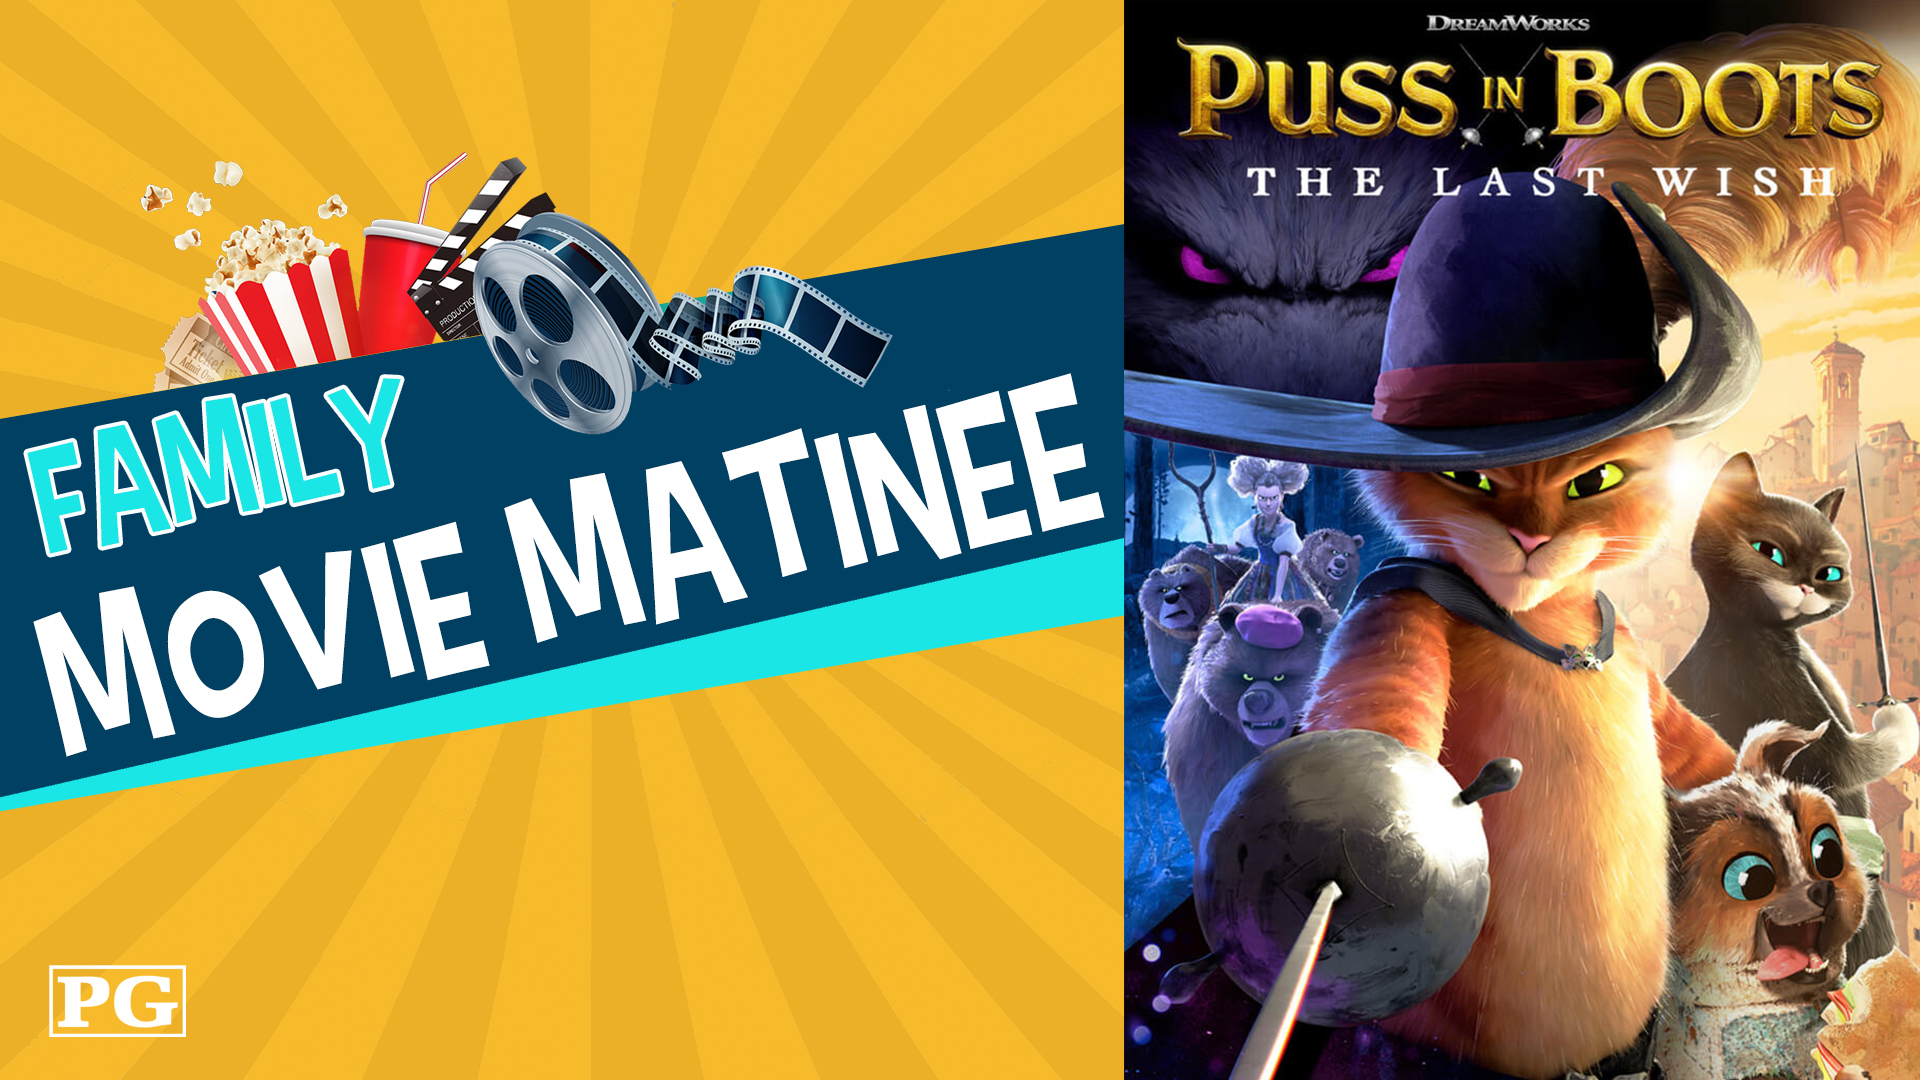 Image reads "Family Movie Matinee" against a orange sunburst background. A bucket of popcorn, a cup, and a movie reel are above the title. The movie title for Puss in Boots: The Last Wish is to the right of the title.